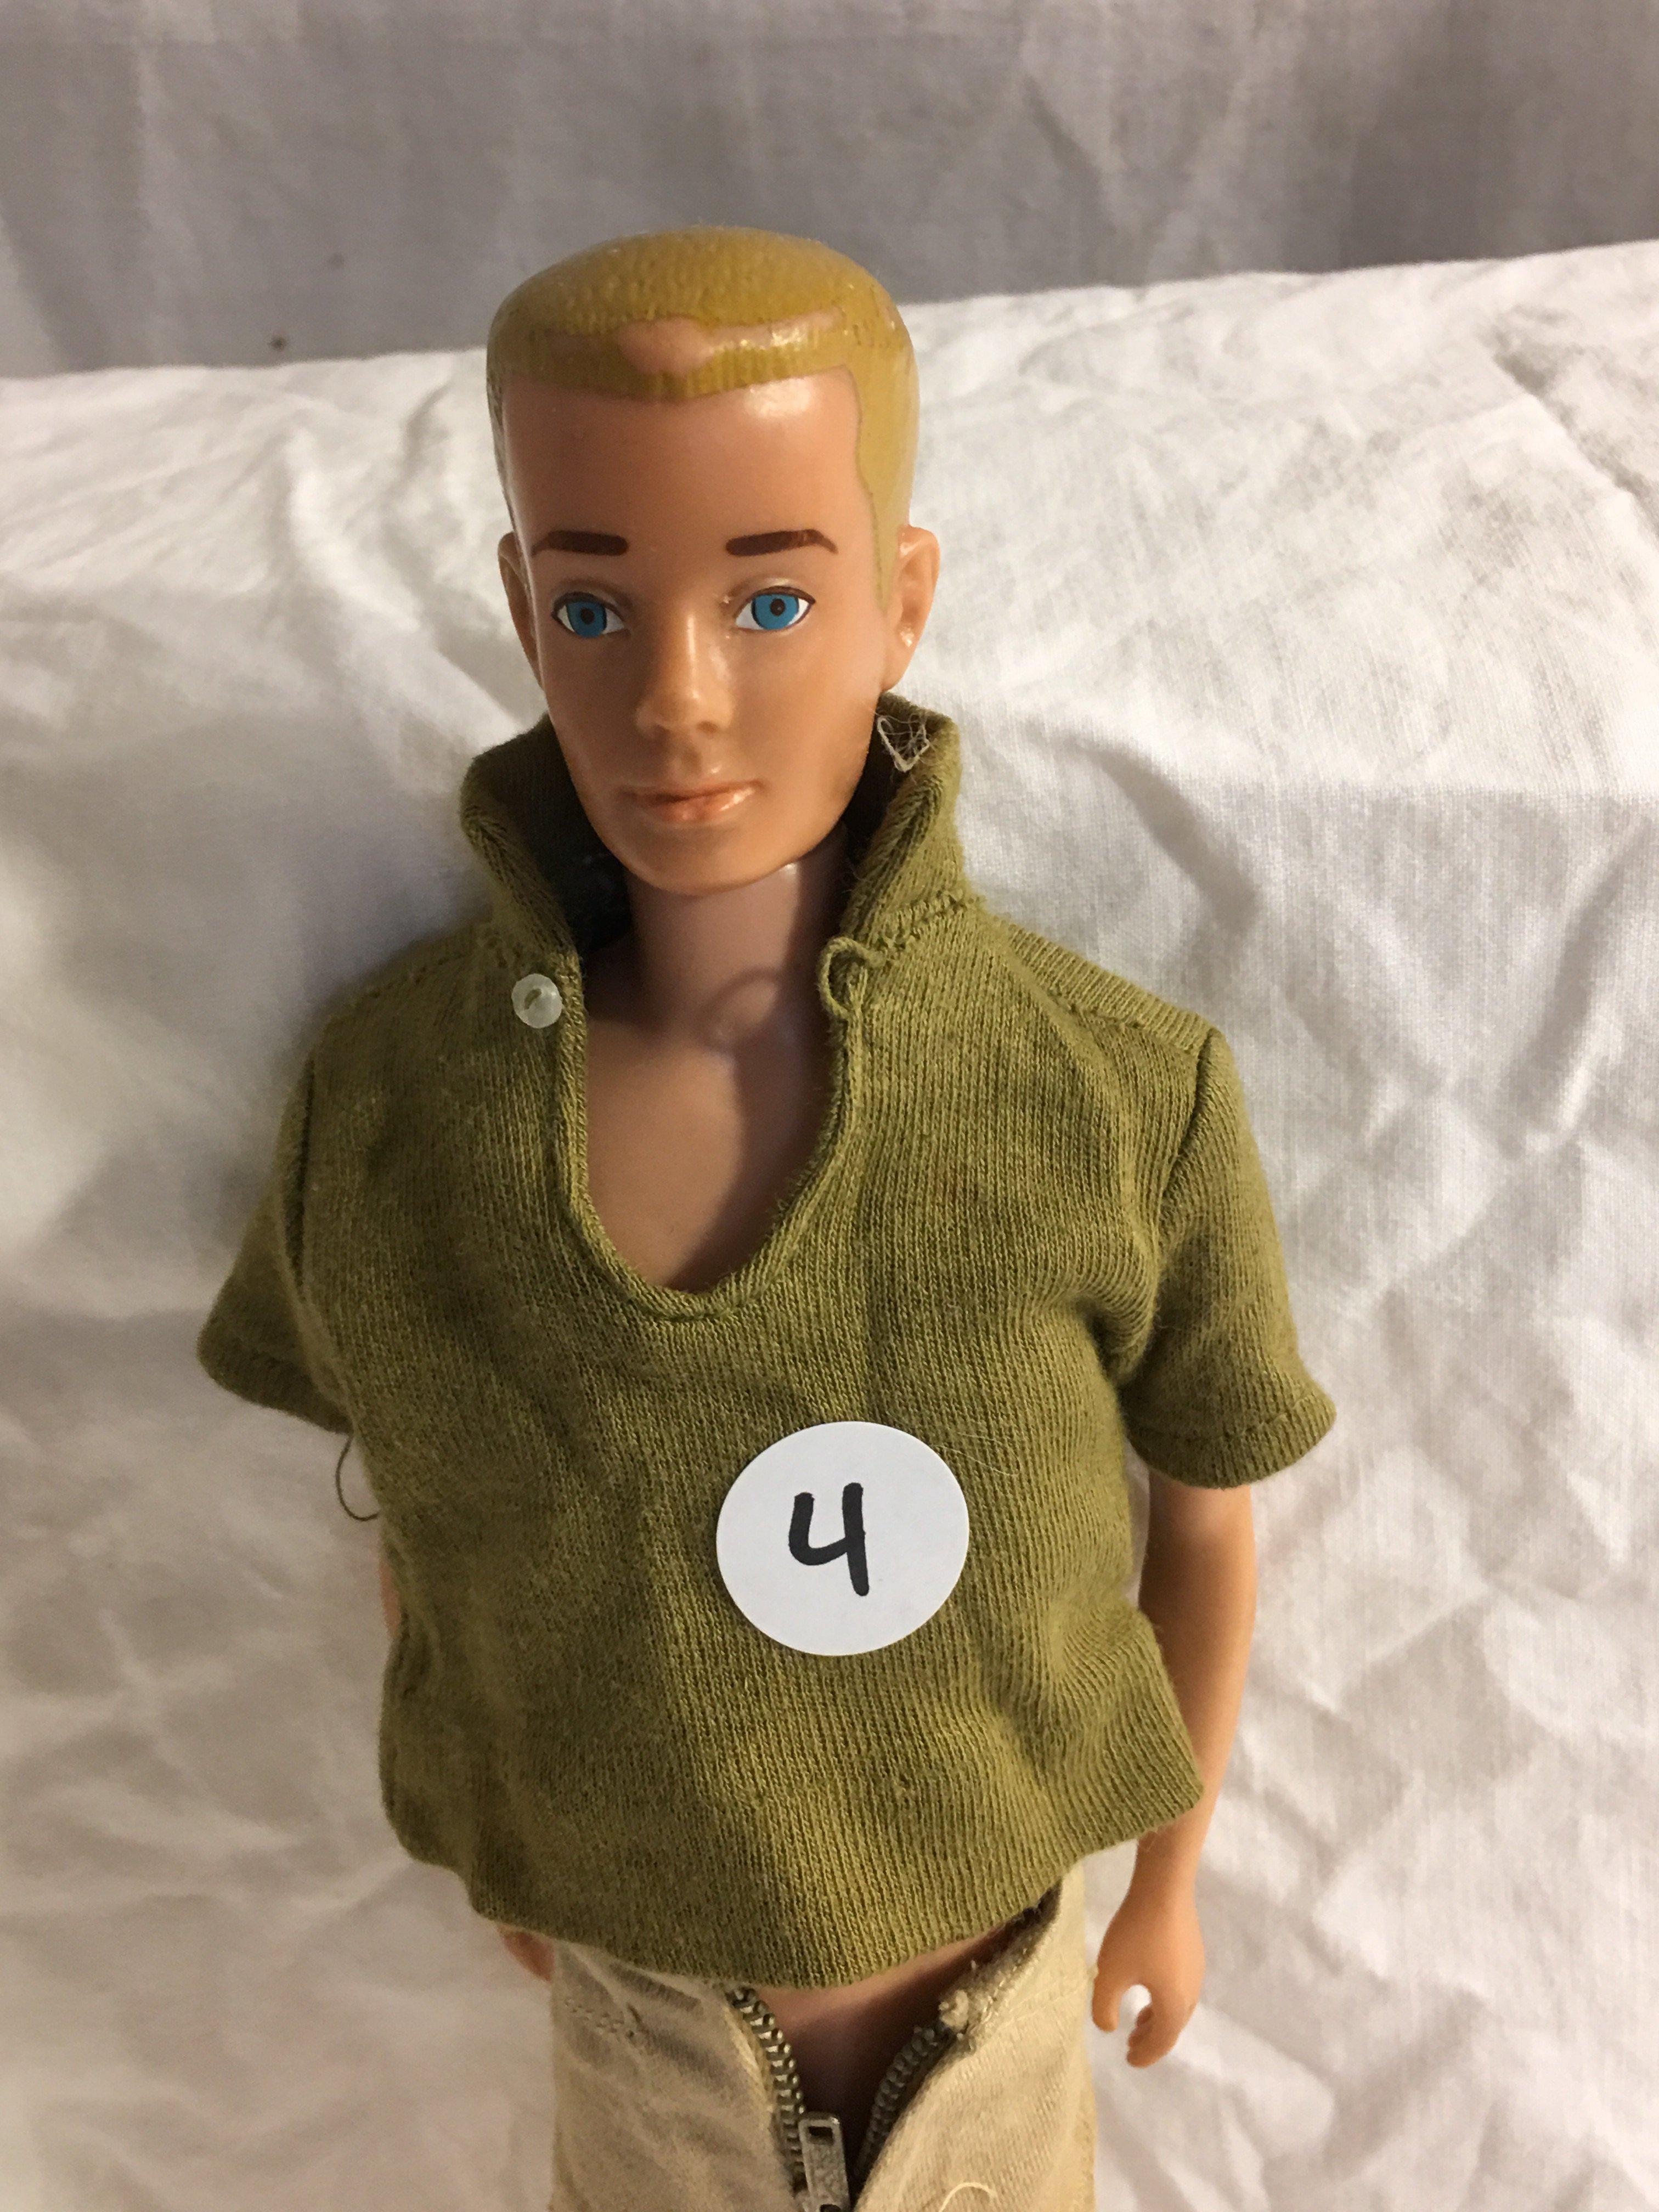 Collector Vintage Mattel Ken Doll Painted Blonde Hair  Japan Marking Size:12"Tall - See Pictures